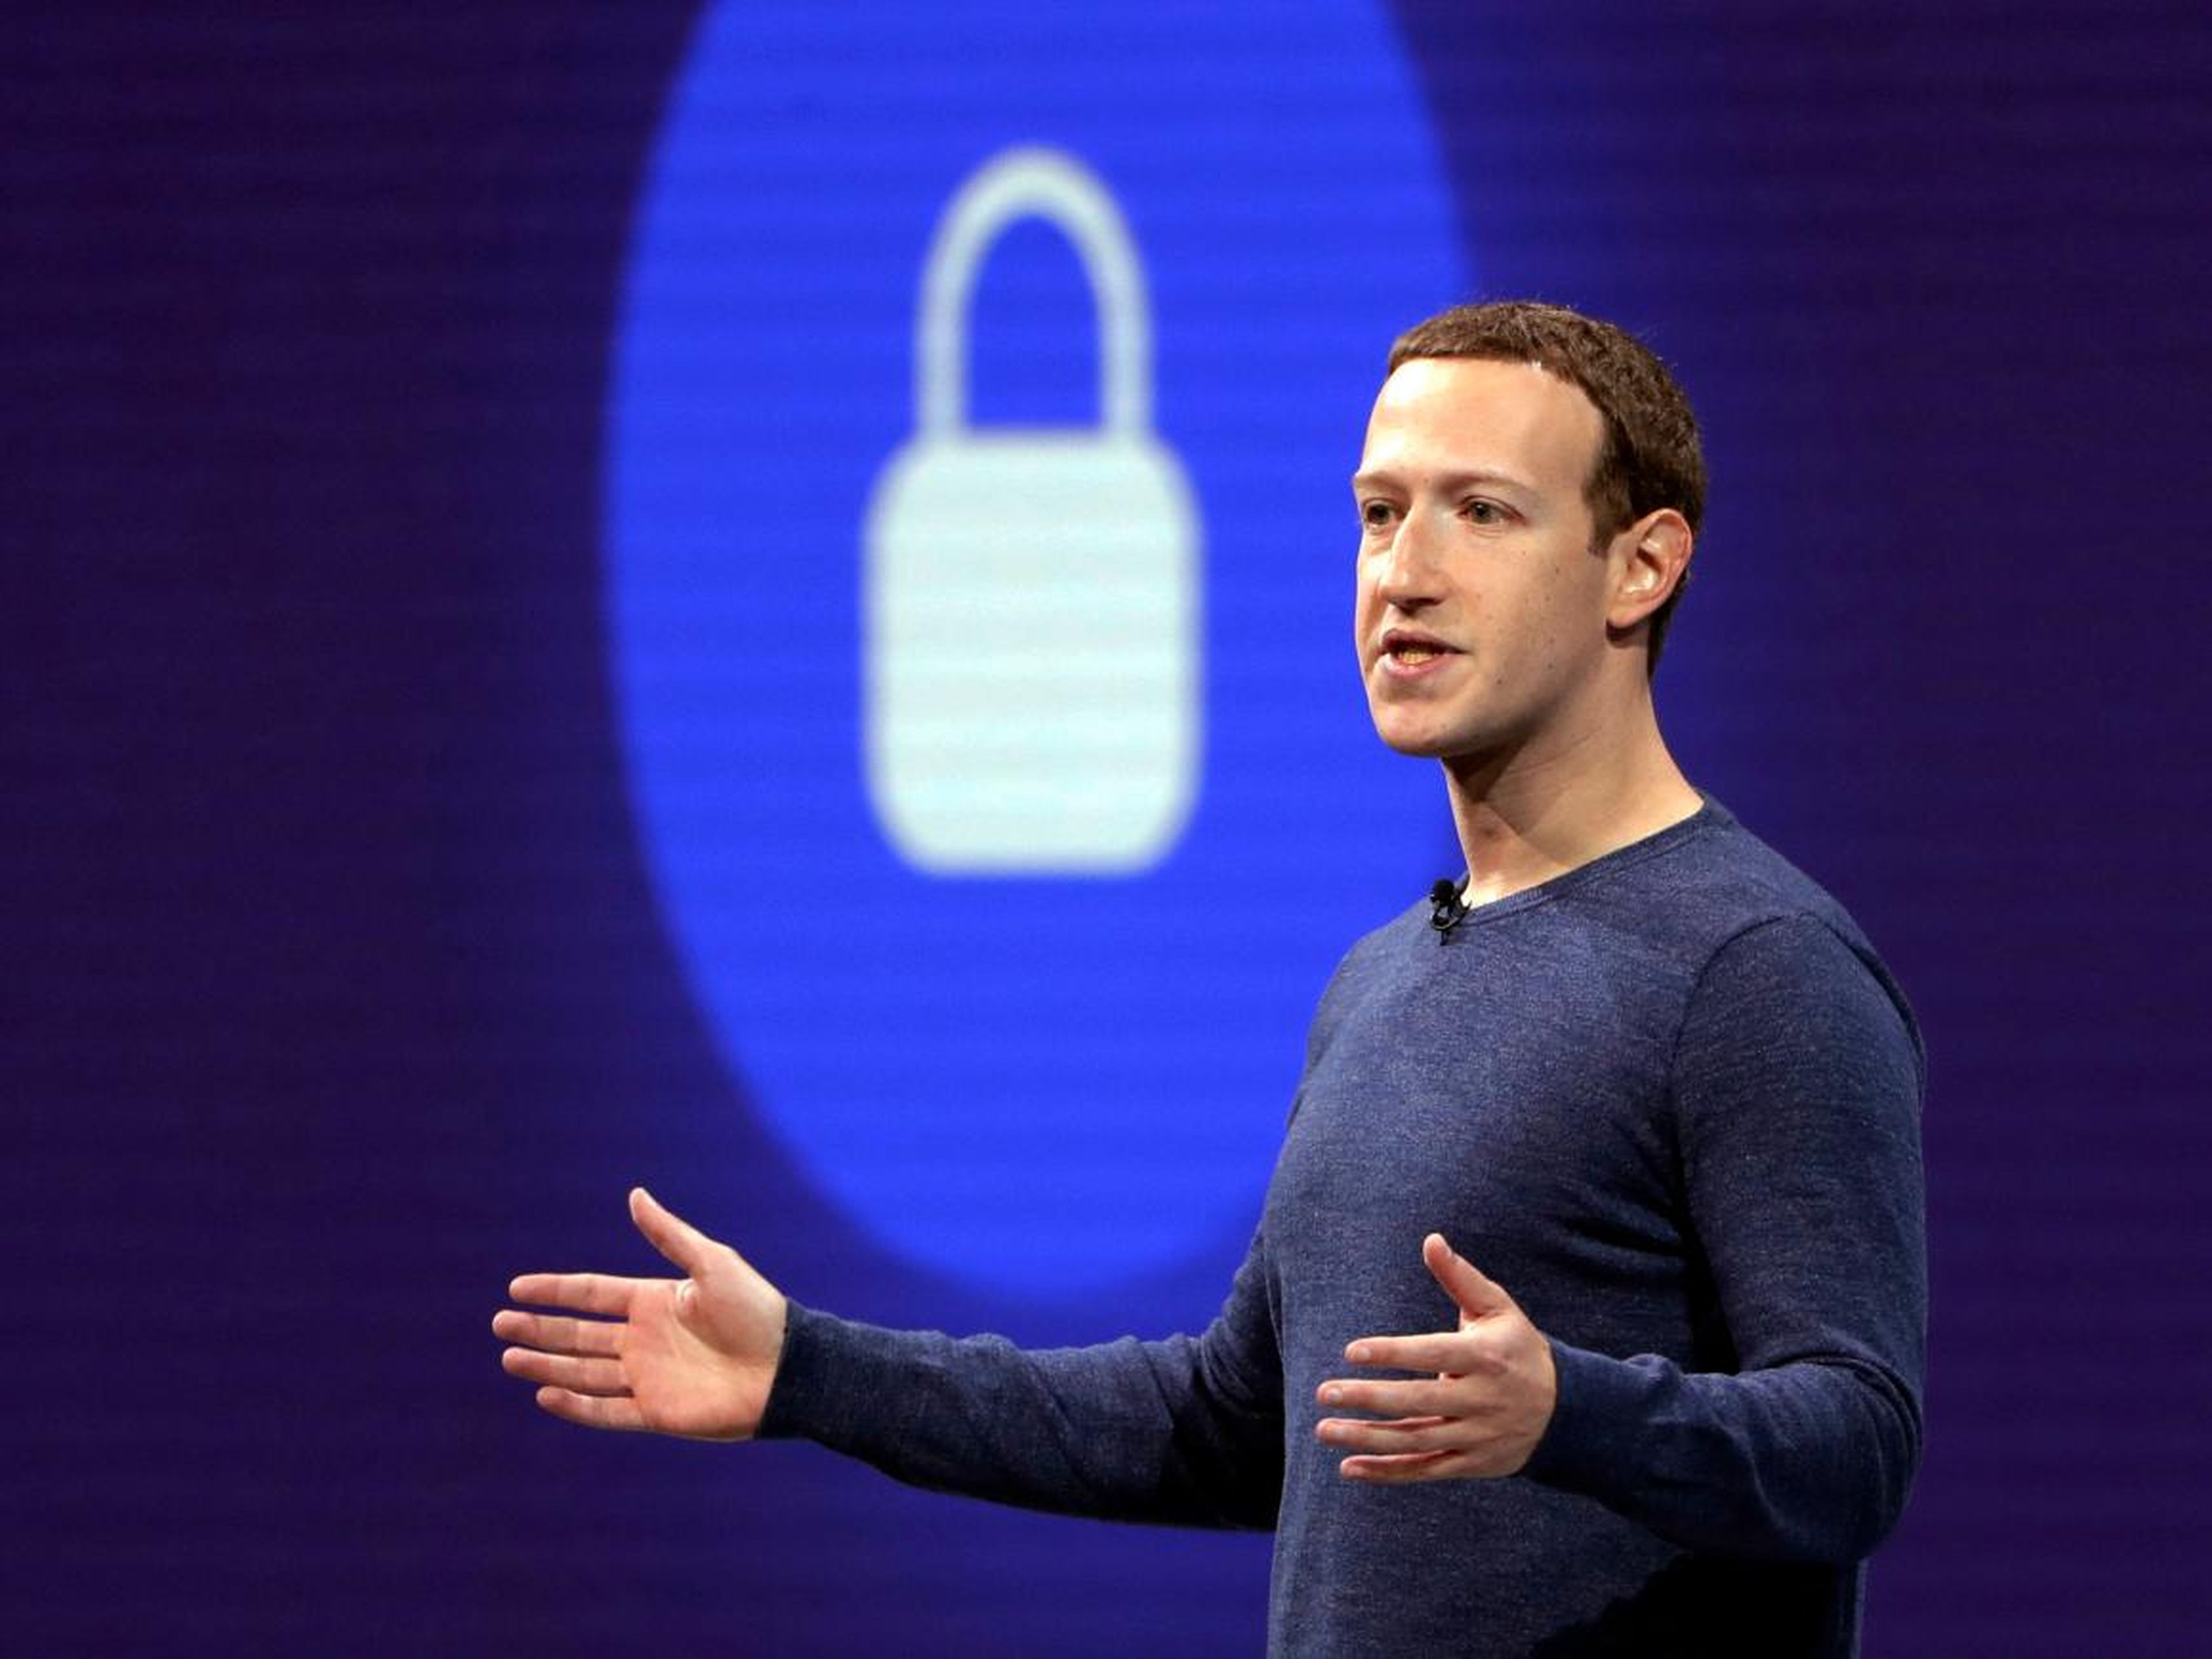 2. More than 540 million Facebook users' data was up for grabs on unprotected servers until April 2019.